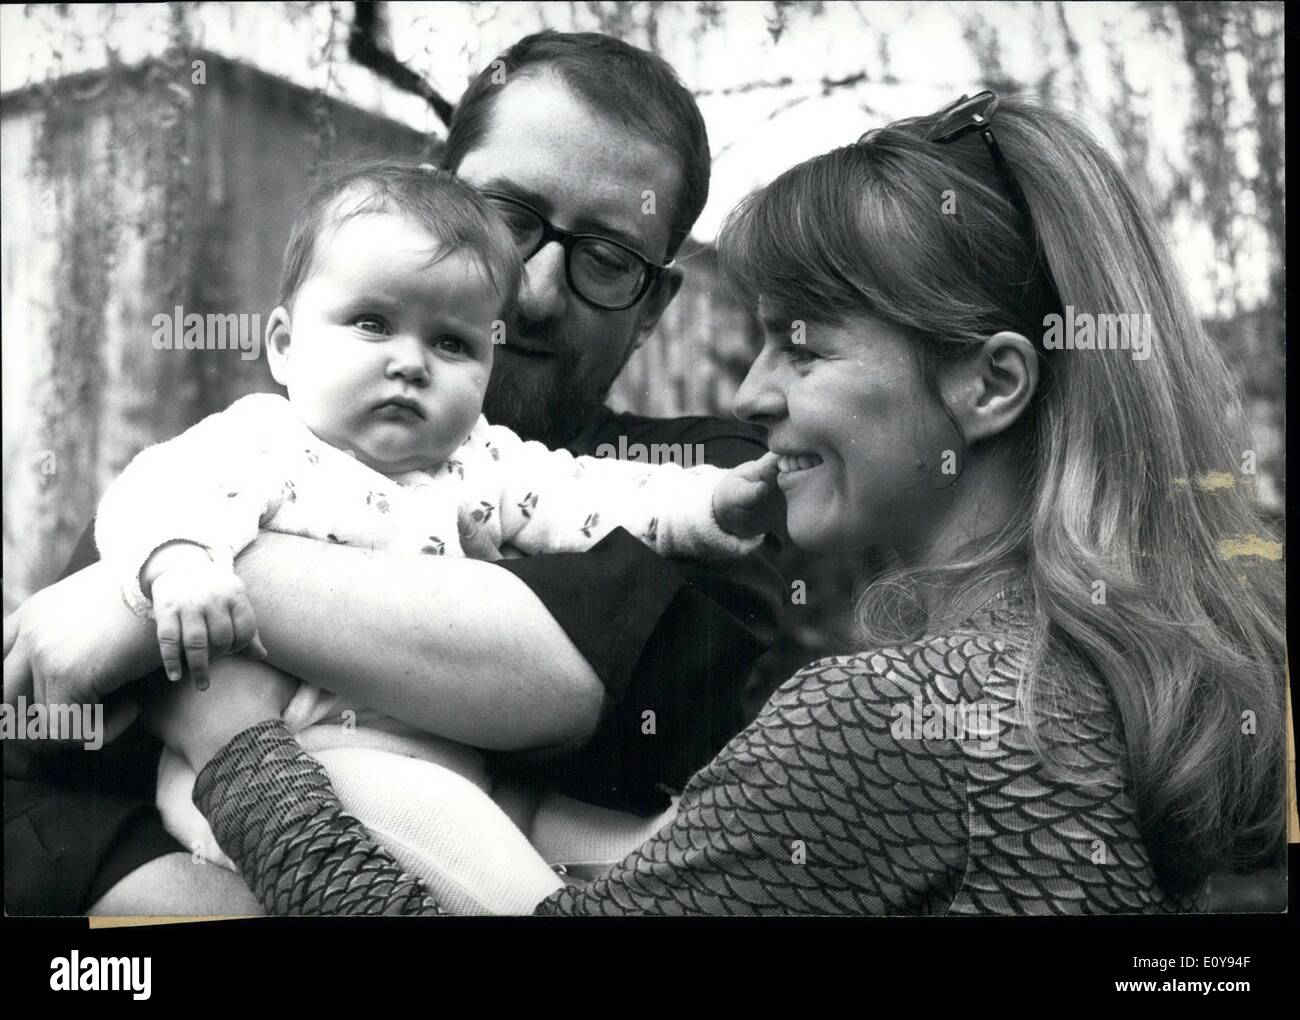 May 07, 1969 - Cornelia Froboess is finished with her months-long tour and glad to hold her little Agnes in her arms again. Agnes was staying with her grandparents in Berlin. Dr. Matiasek works in theater in Wuppertal, which is where Connie and Agnes will be going next week. Stock Photo